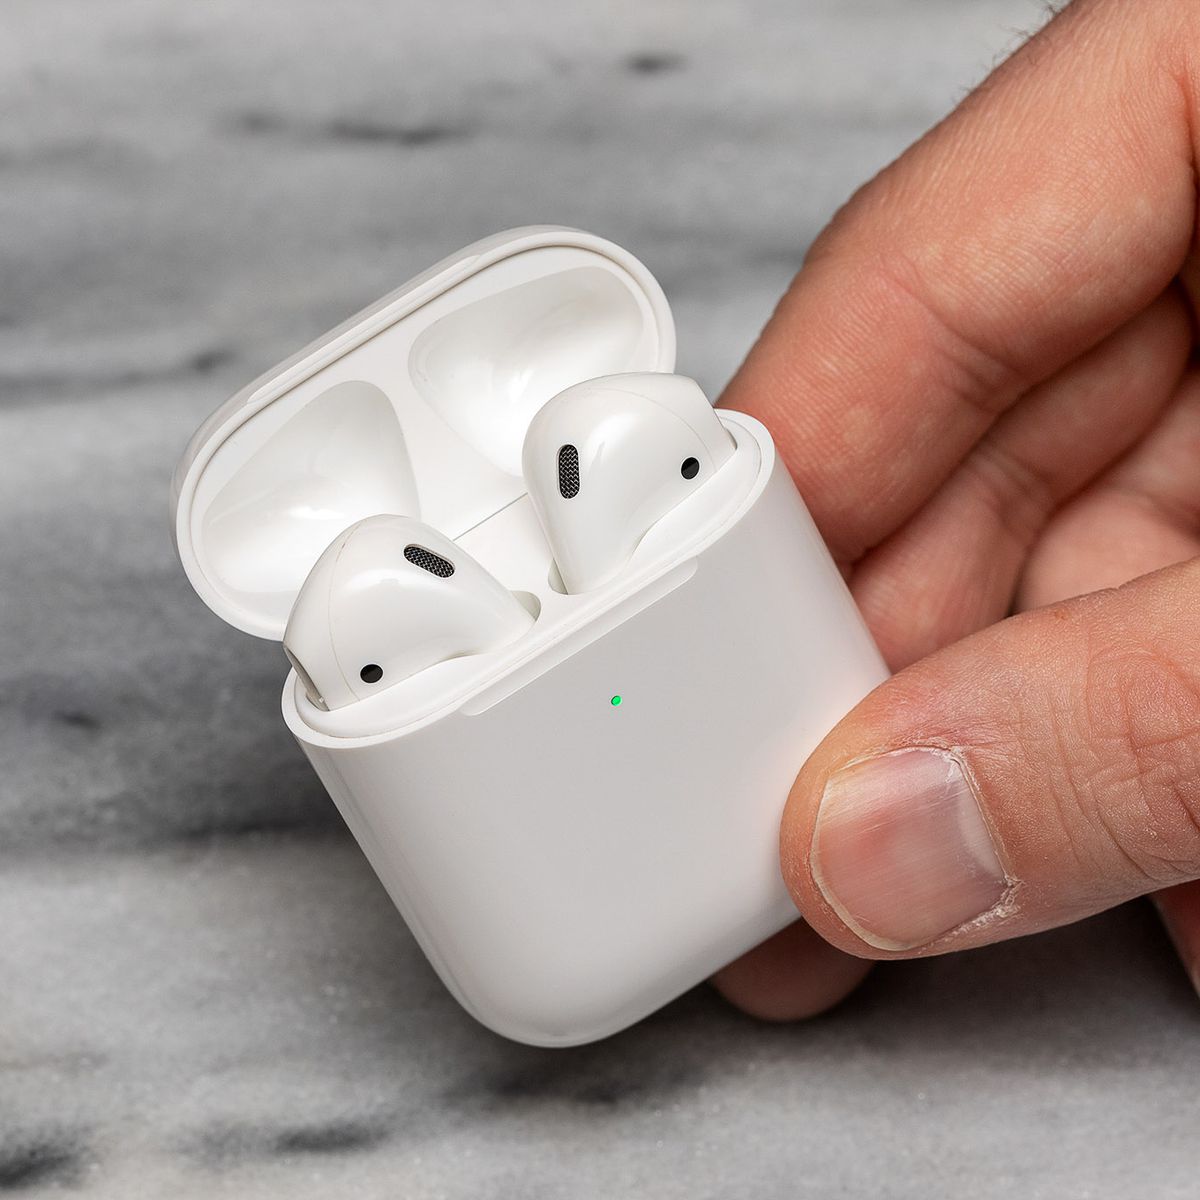 Apple’s second-generation AirPods